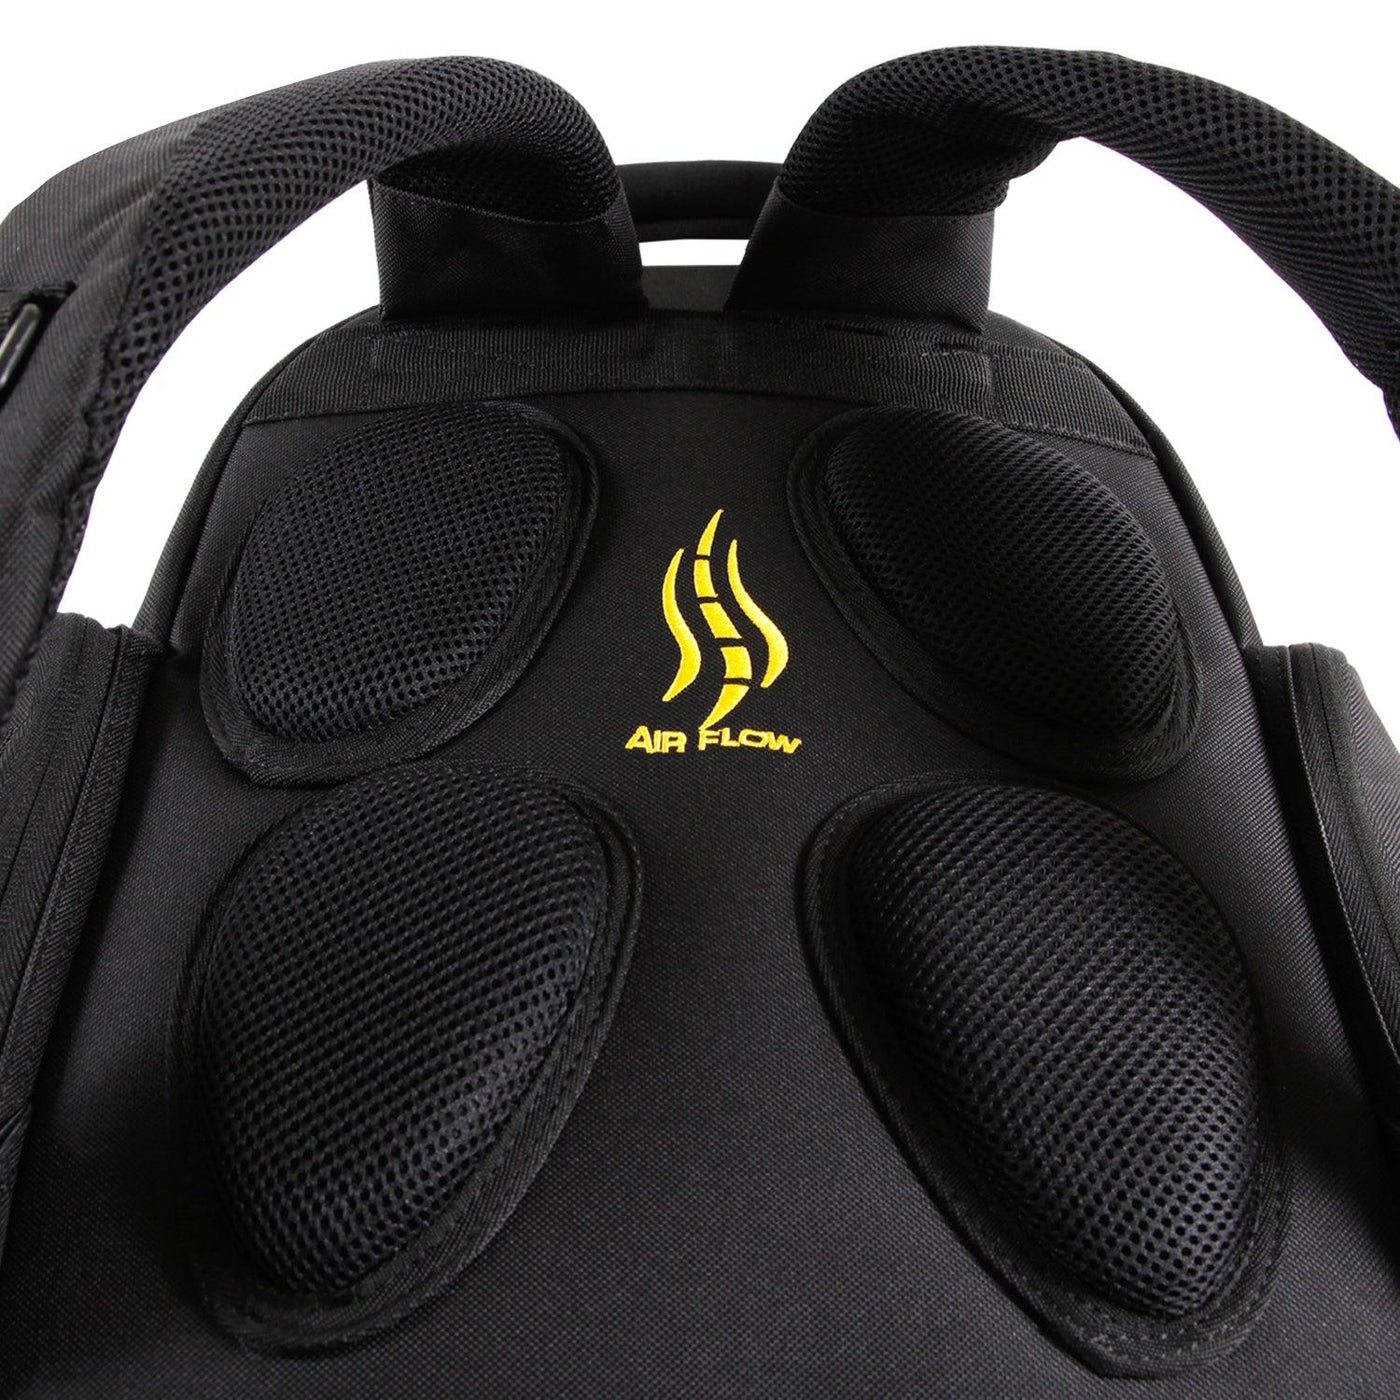 Pads on back of Task tool backpack